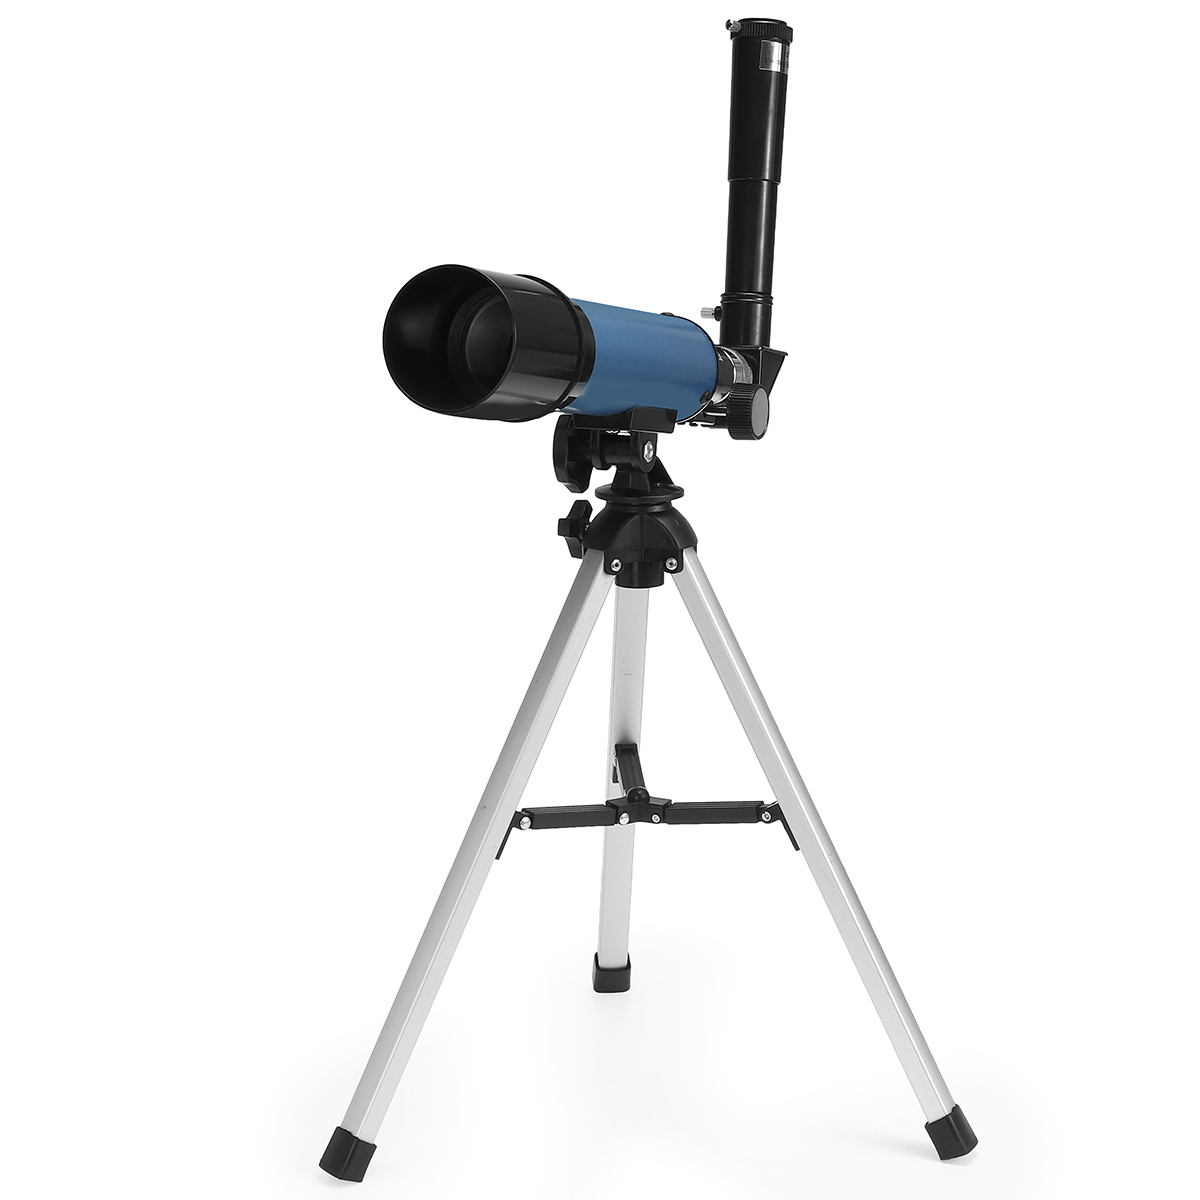 90x-Magnification-Astronomical-Telescope-Clear-Image-with-Remote-Control-and-Camera-Rod-for-Observe--1851121-3